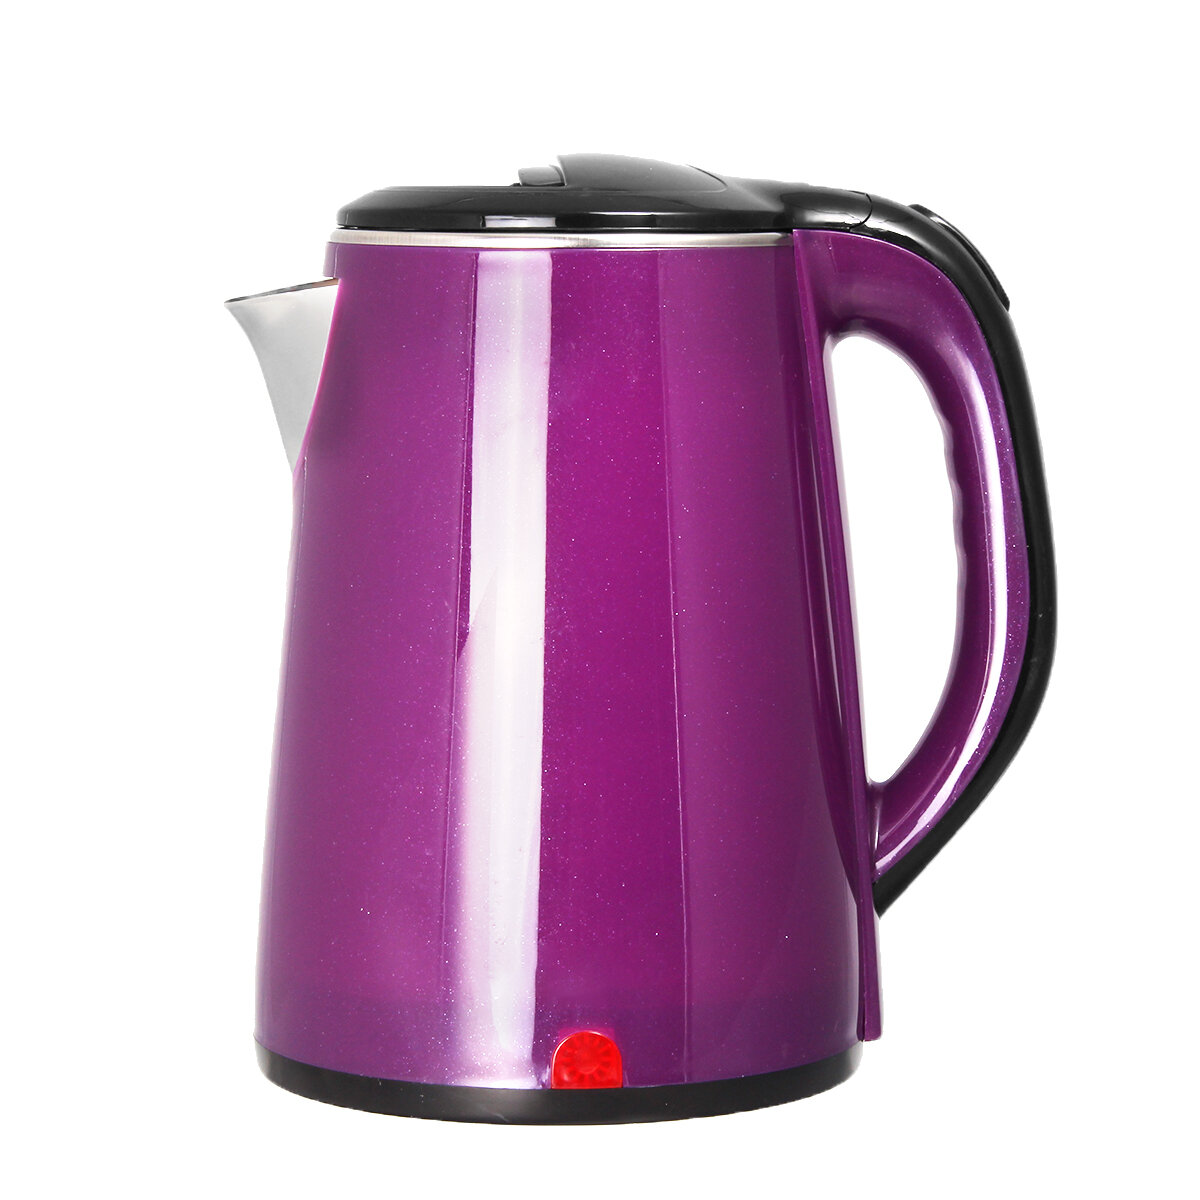 

1500W 220V 2.5L Electric Kettle Stainless Steel Jug Kettle Home Boiler Anti-dry Automatic Power Off